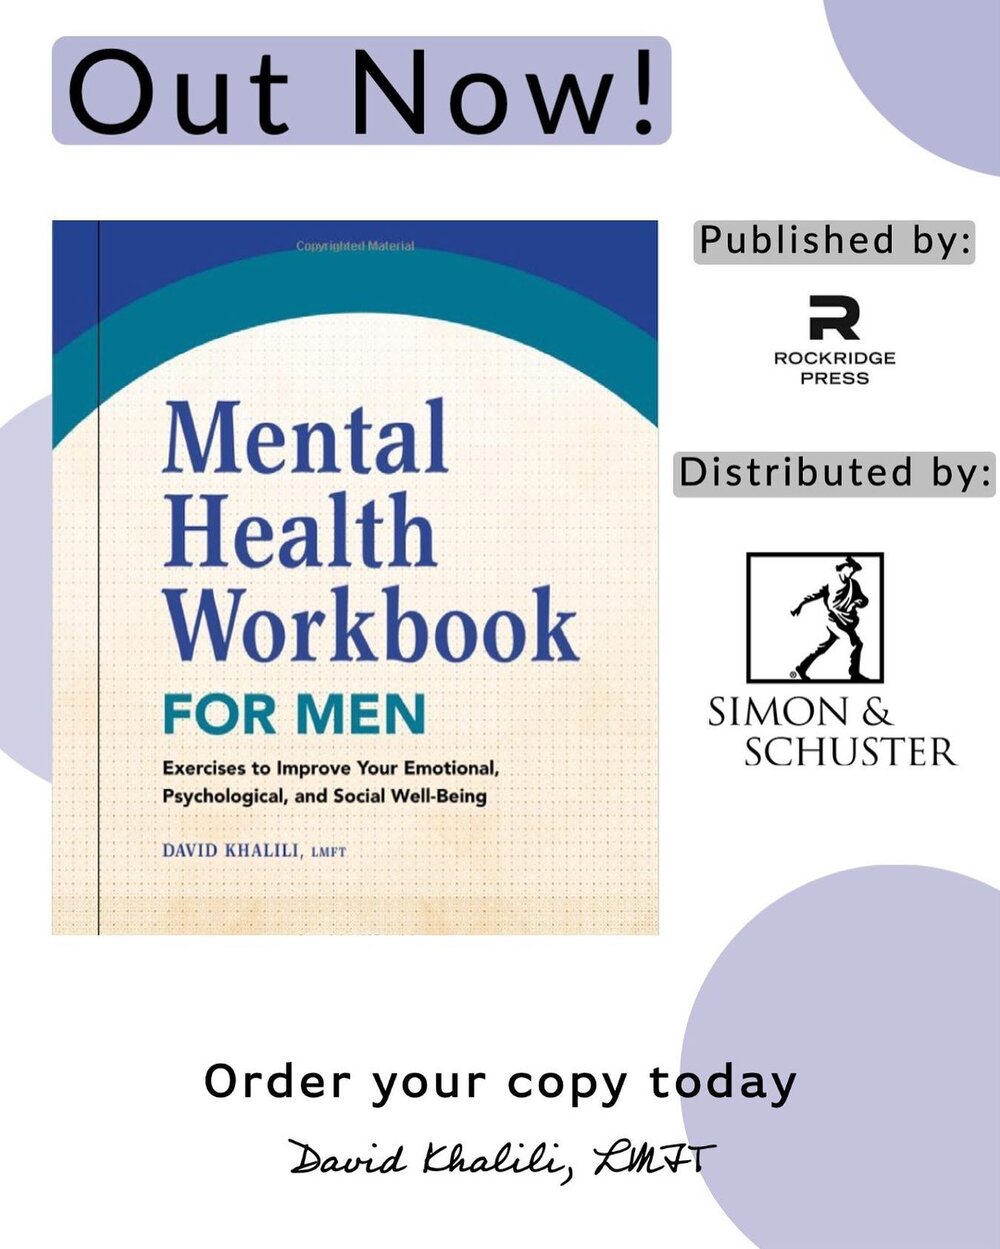 My book &quot;Mental Health Workbook for Men&quot; is now available!

The world doesn&rsquo;t always encourage men to be open and honest about their emotions&mdash;especially when it comes to mental health struggles. This workbook breaks through thos